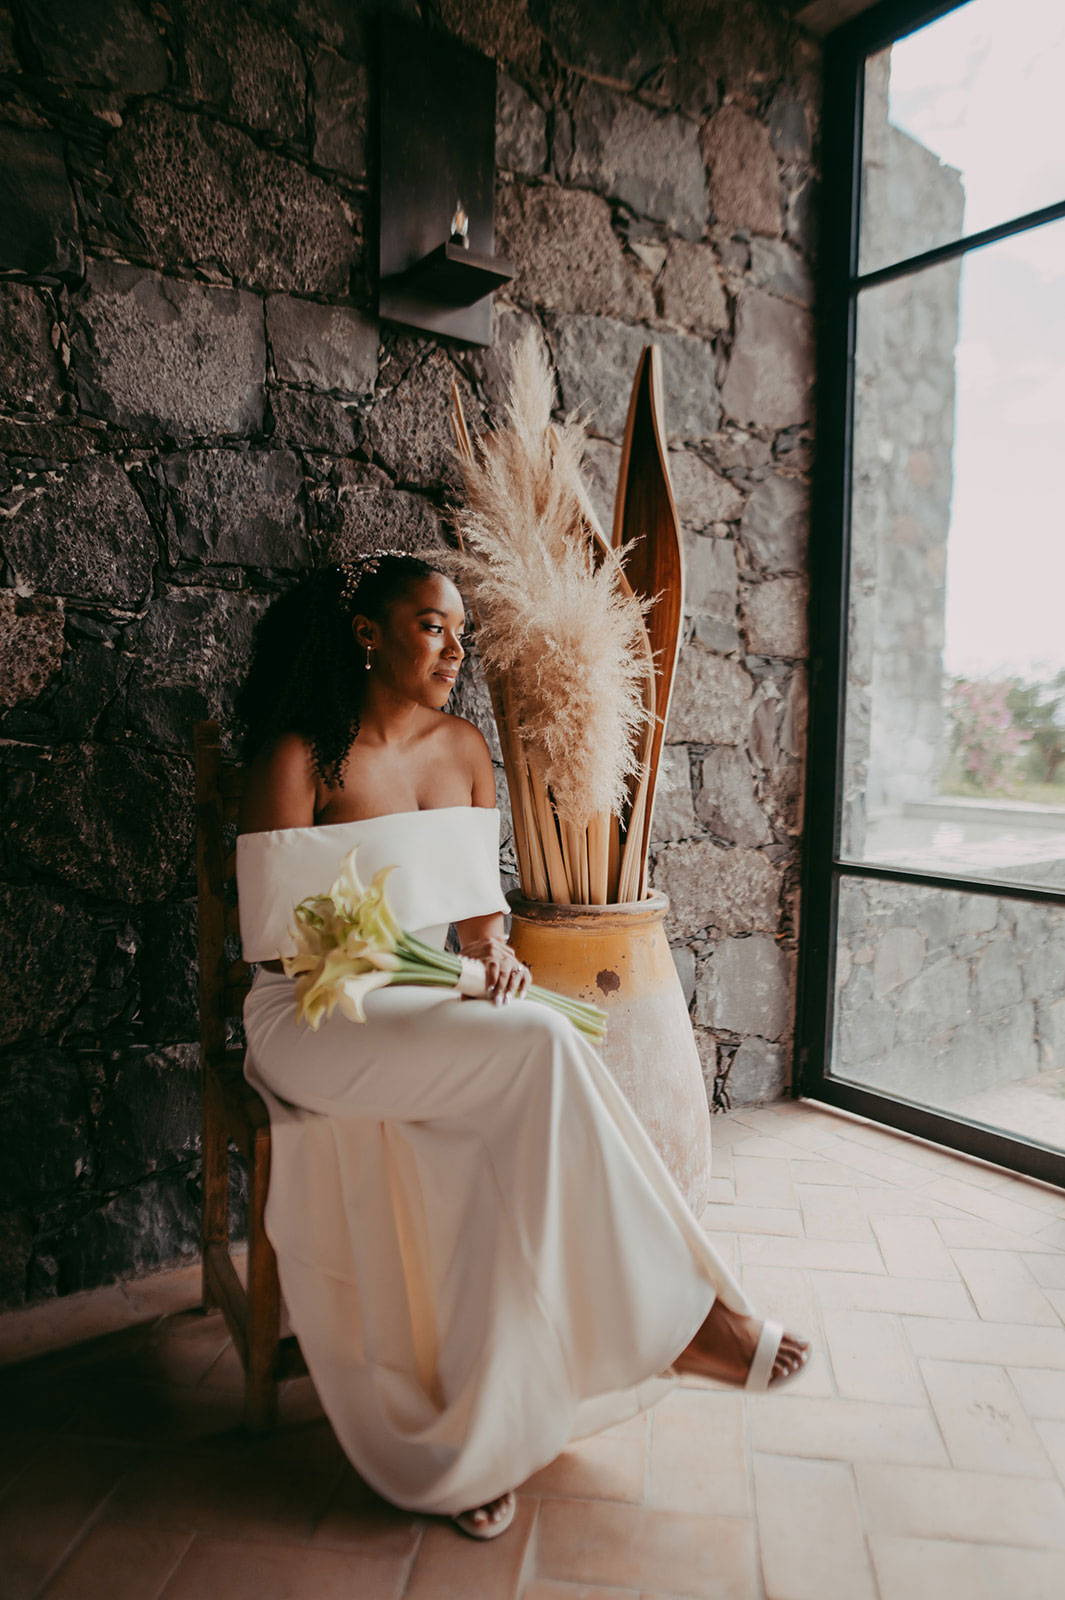 Bride sitting down holding bouquet of flowers